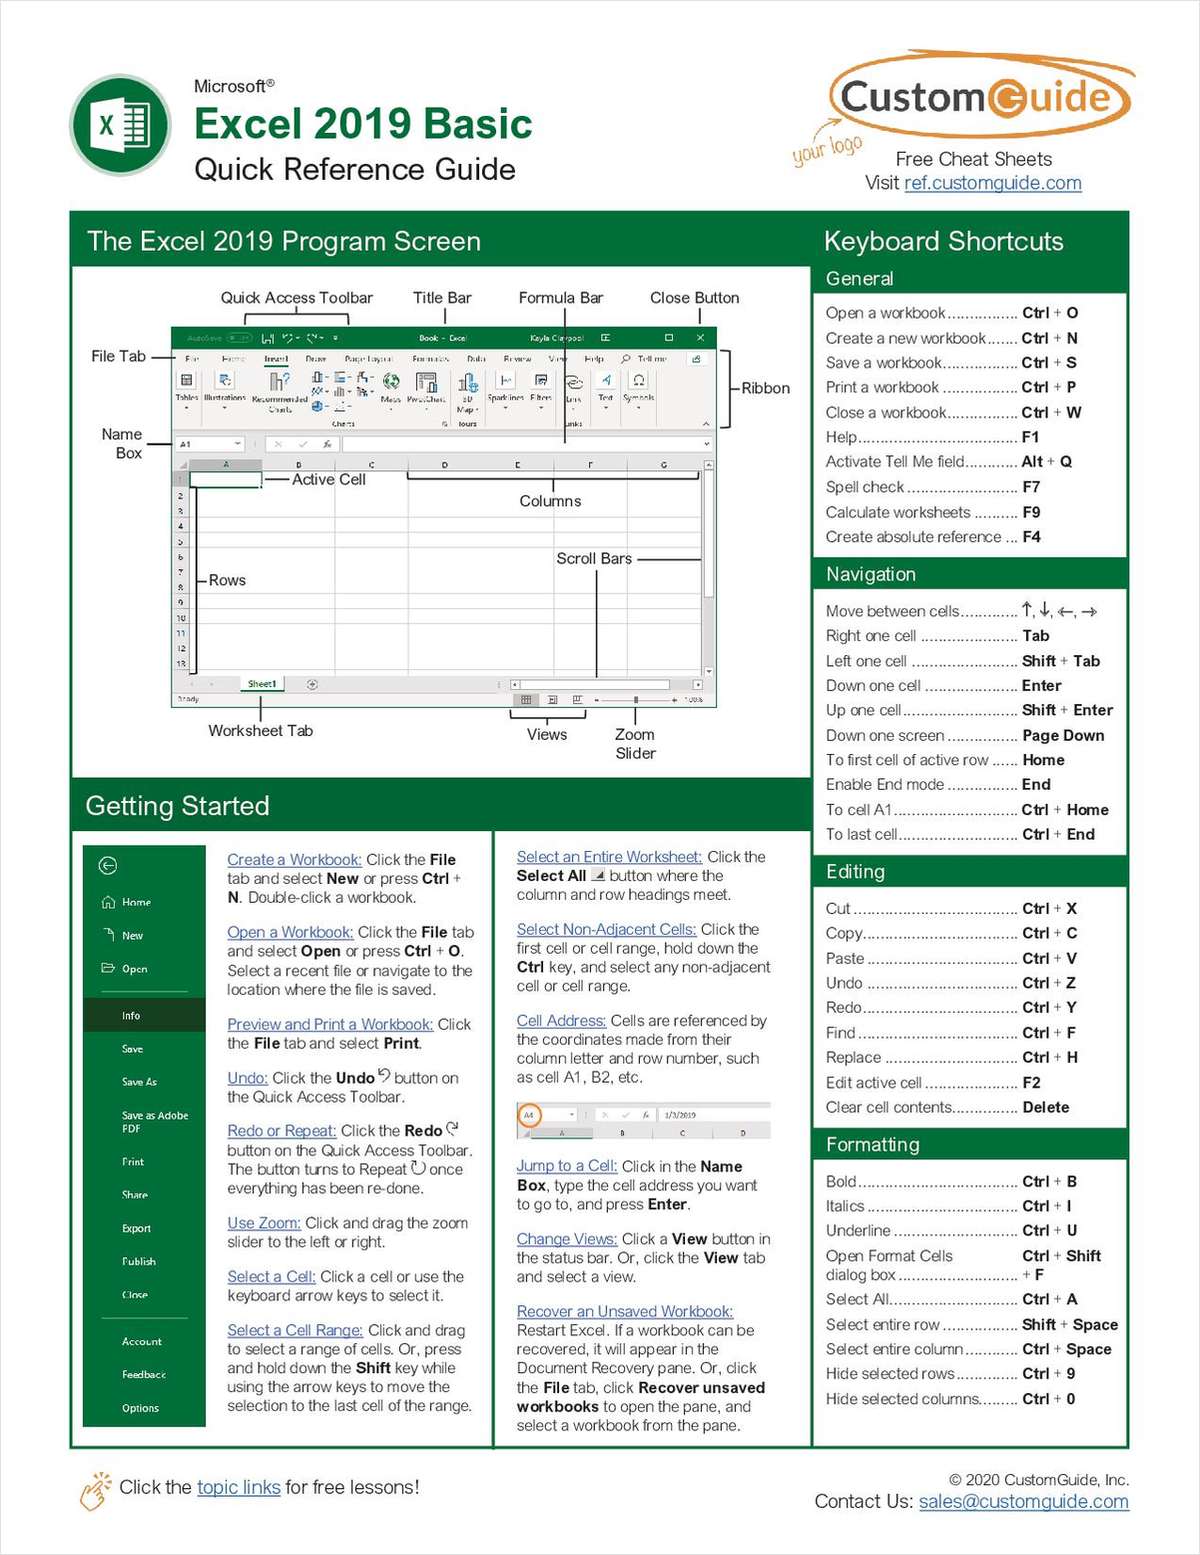 Microsoft Excel 2019 Basic - Quick Reference Guide